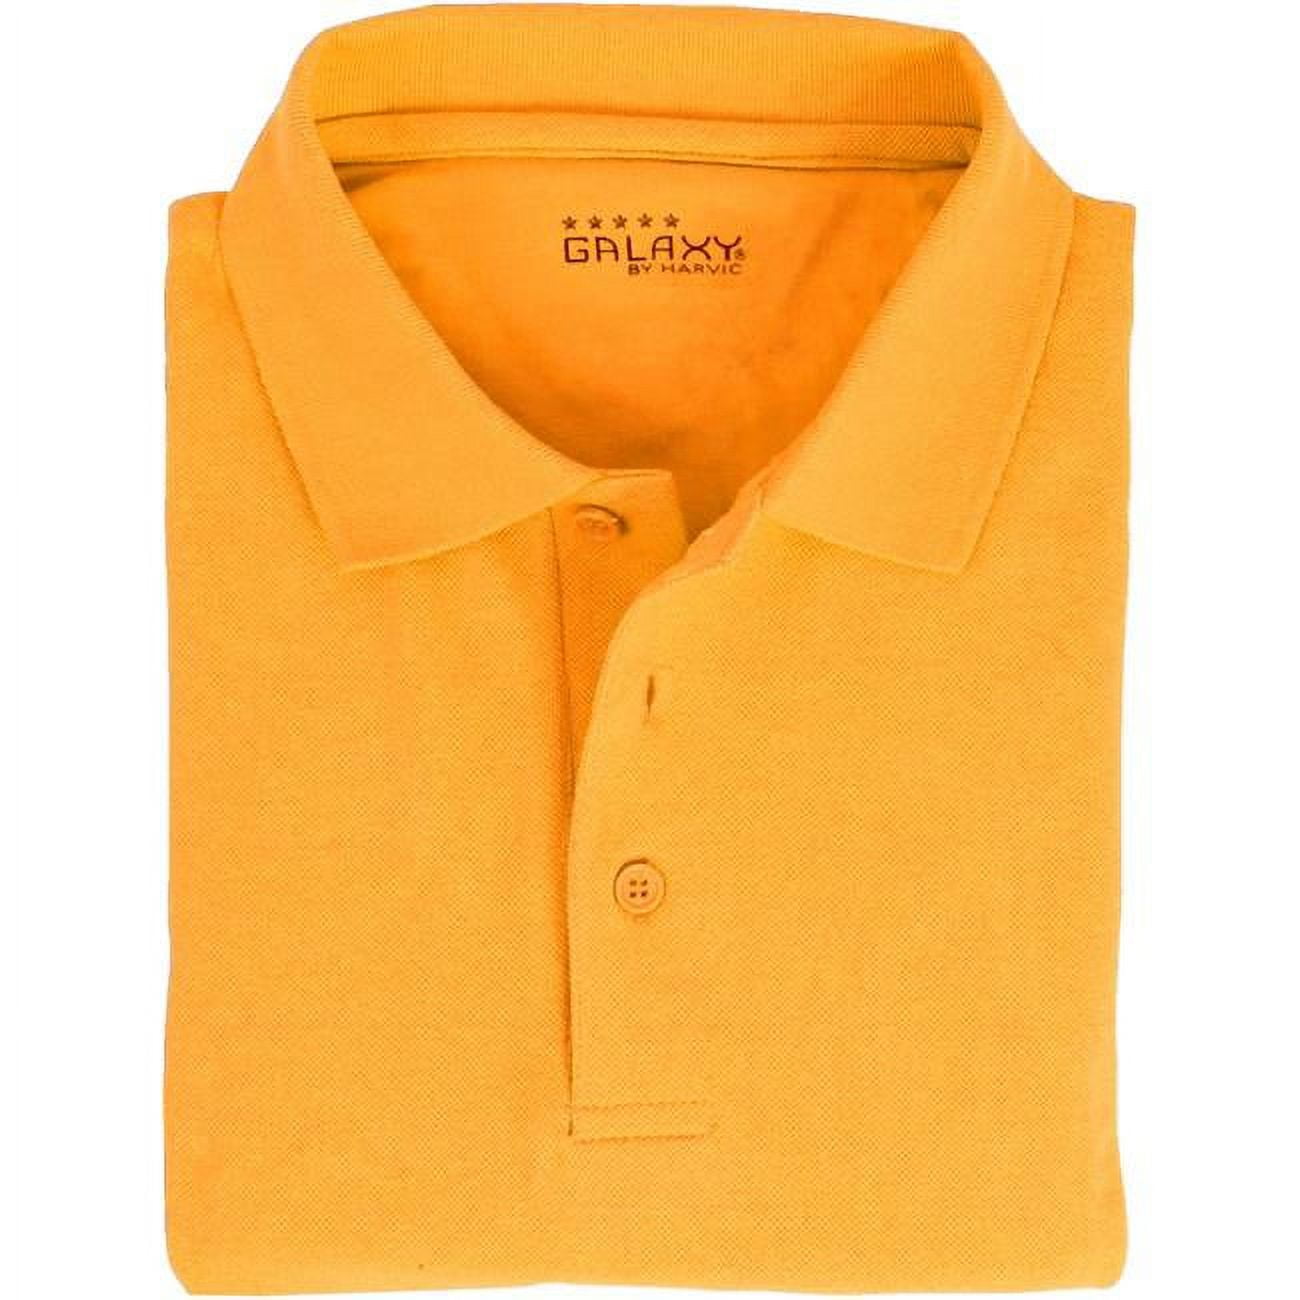 DDI 2267175 Adult Gold Short Sleeve Polo Shirt - Size S Case of 36 ...